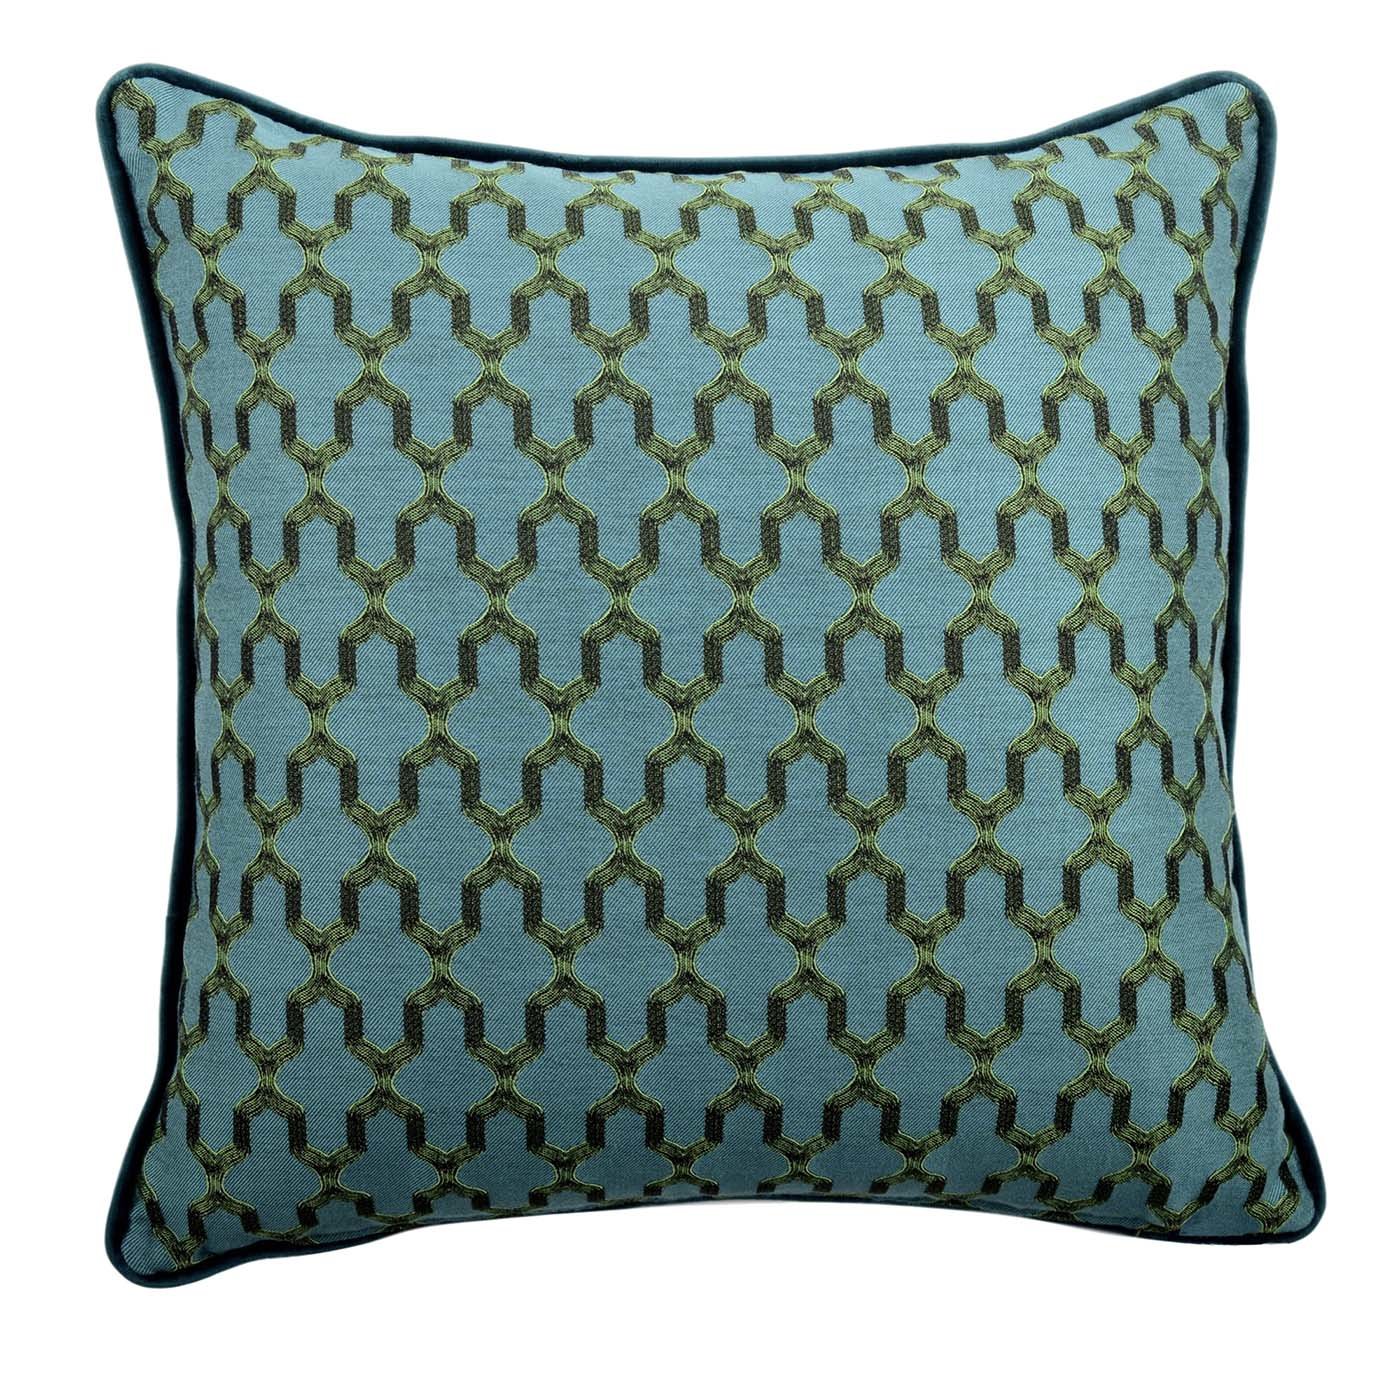 Turquoise Carré Cushion - Main view